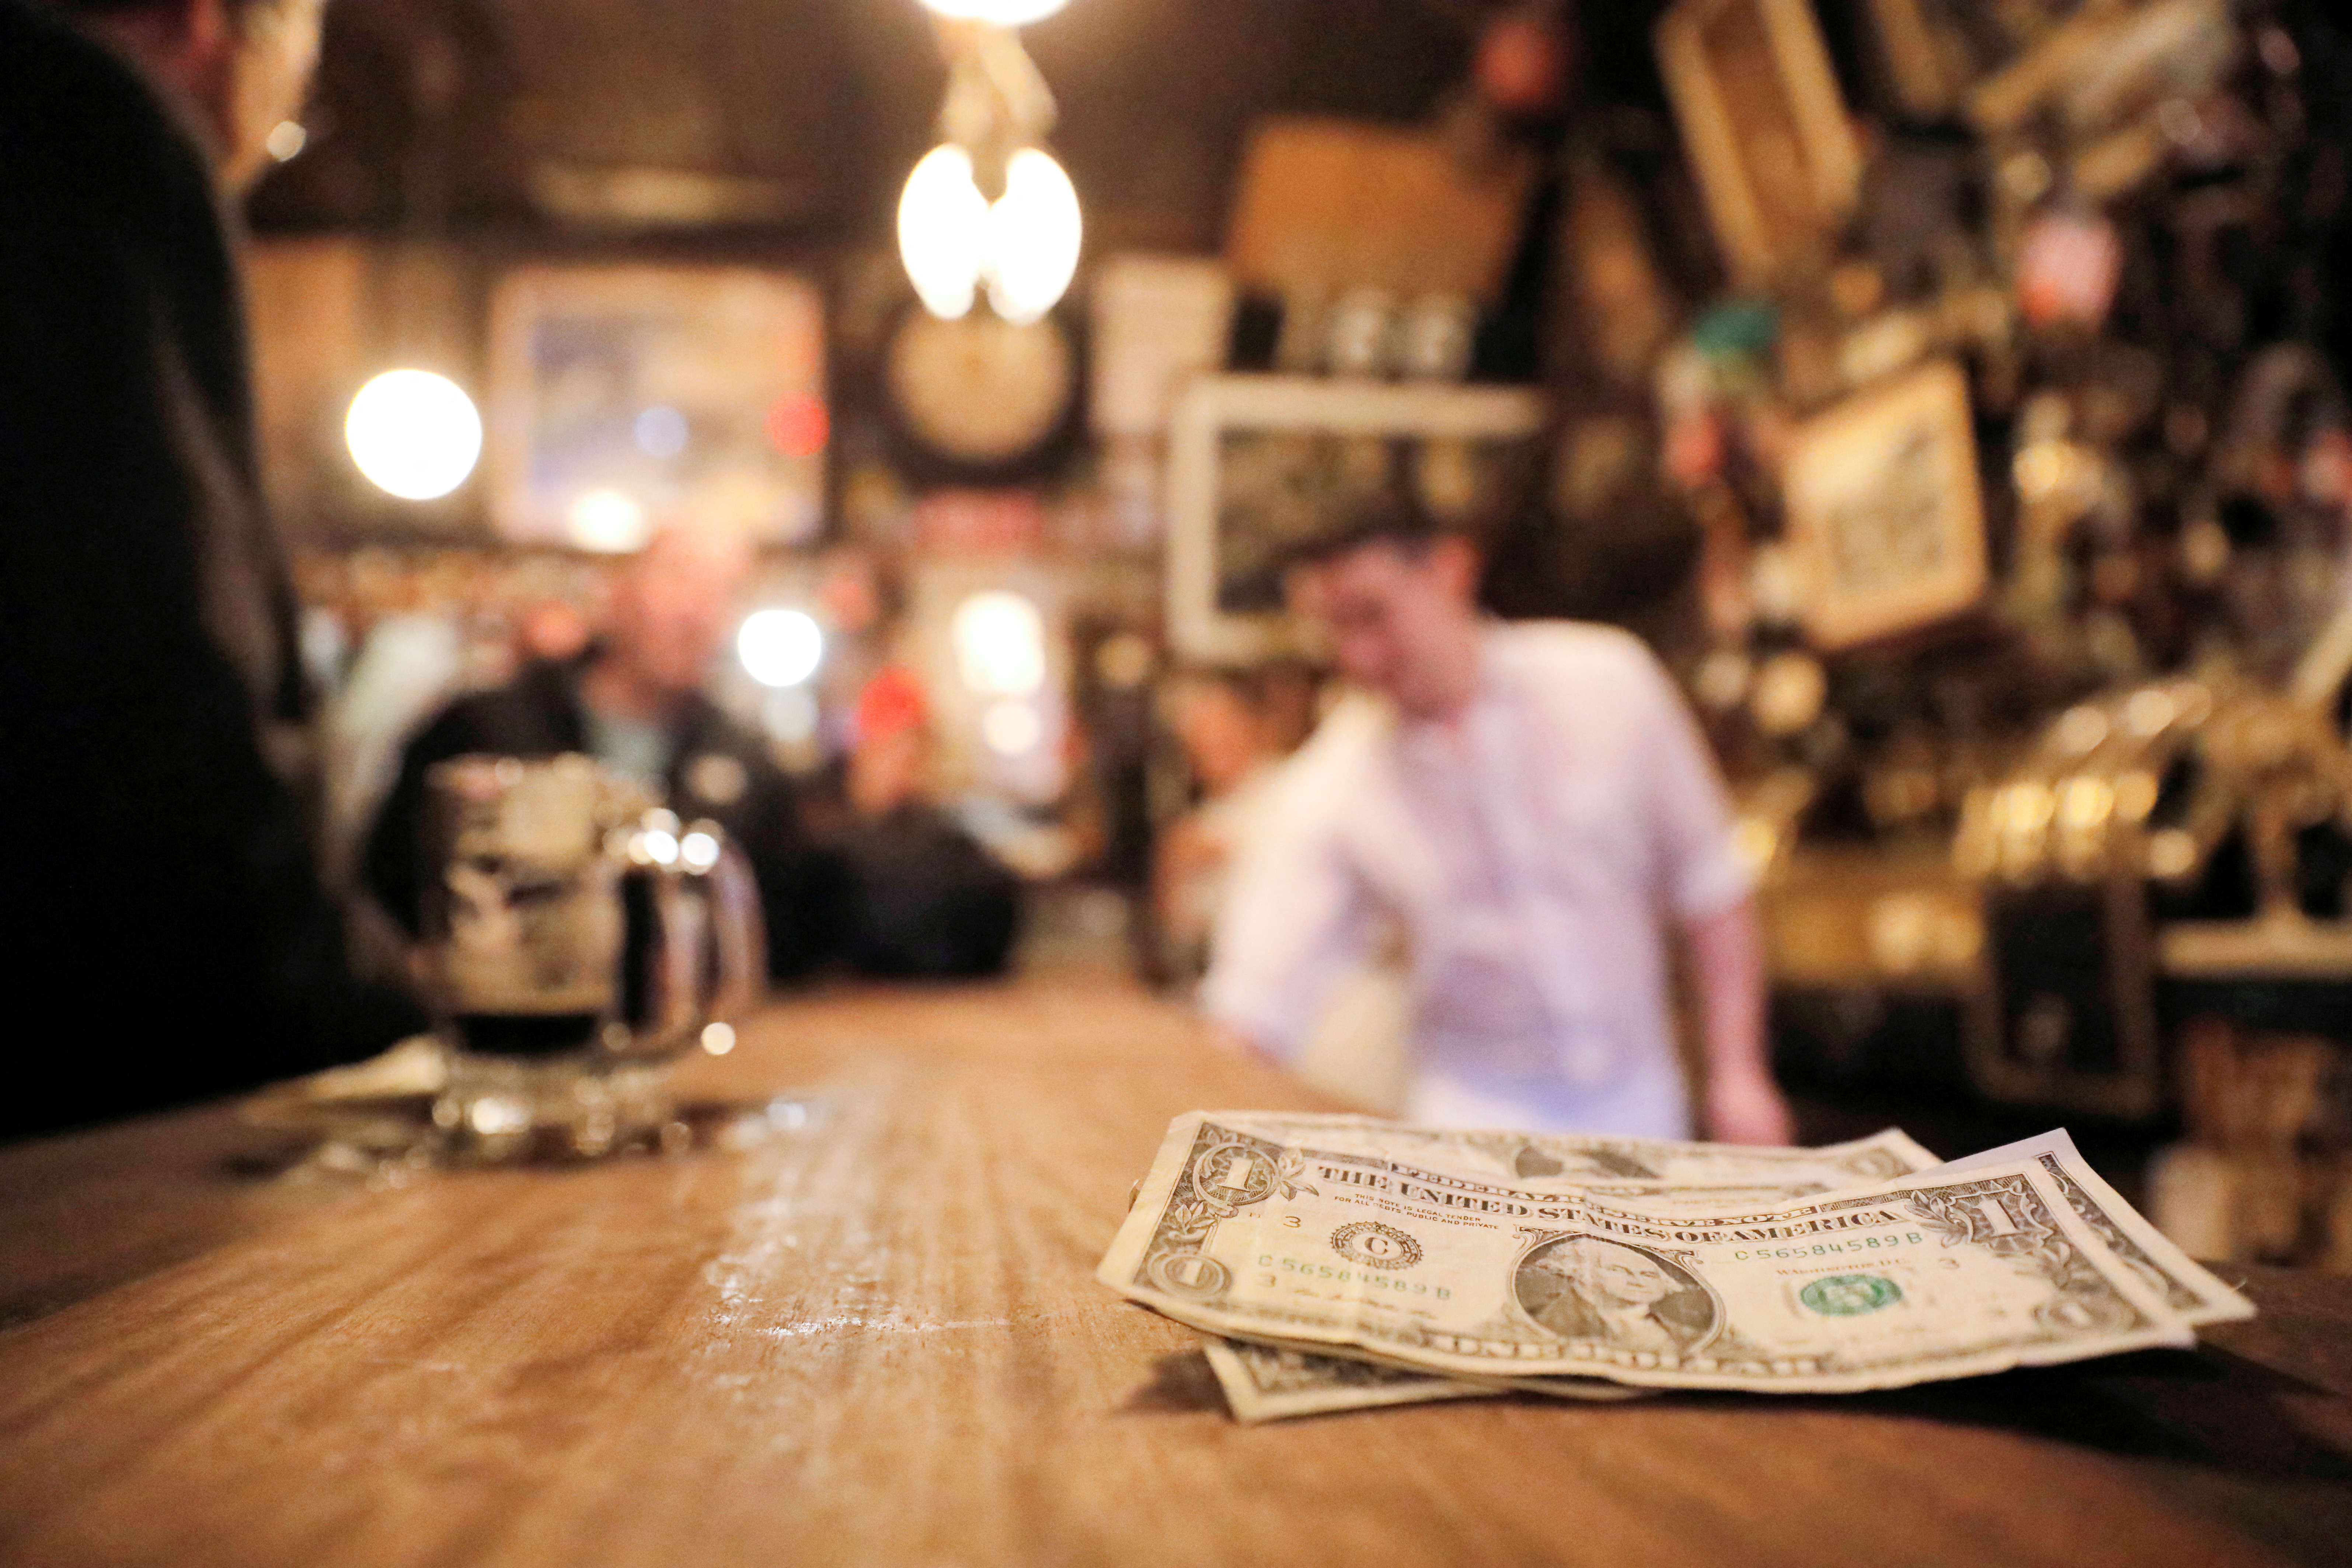 Tips are seen on the bar at McSorley's Old Ale House, which, established in 1854, is referred to as New York City's oldest Irish saloon and was ordered to close at 8:00pm as part of a city-wide order to close bars and restaurants